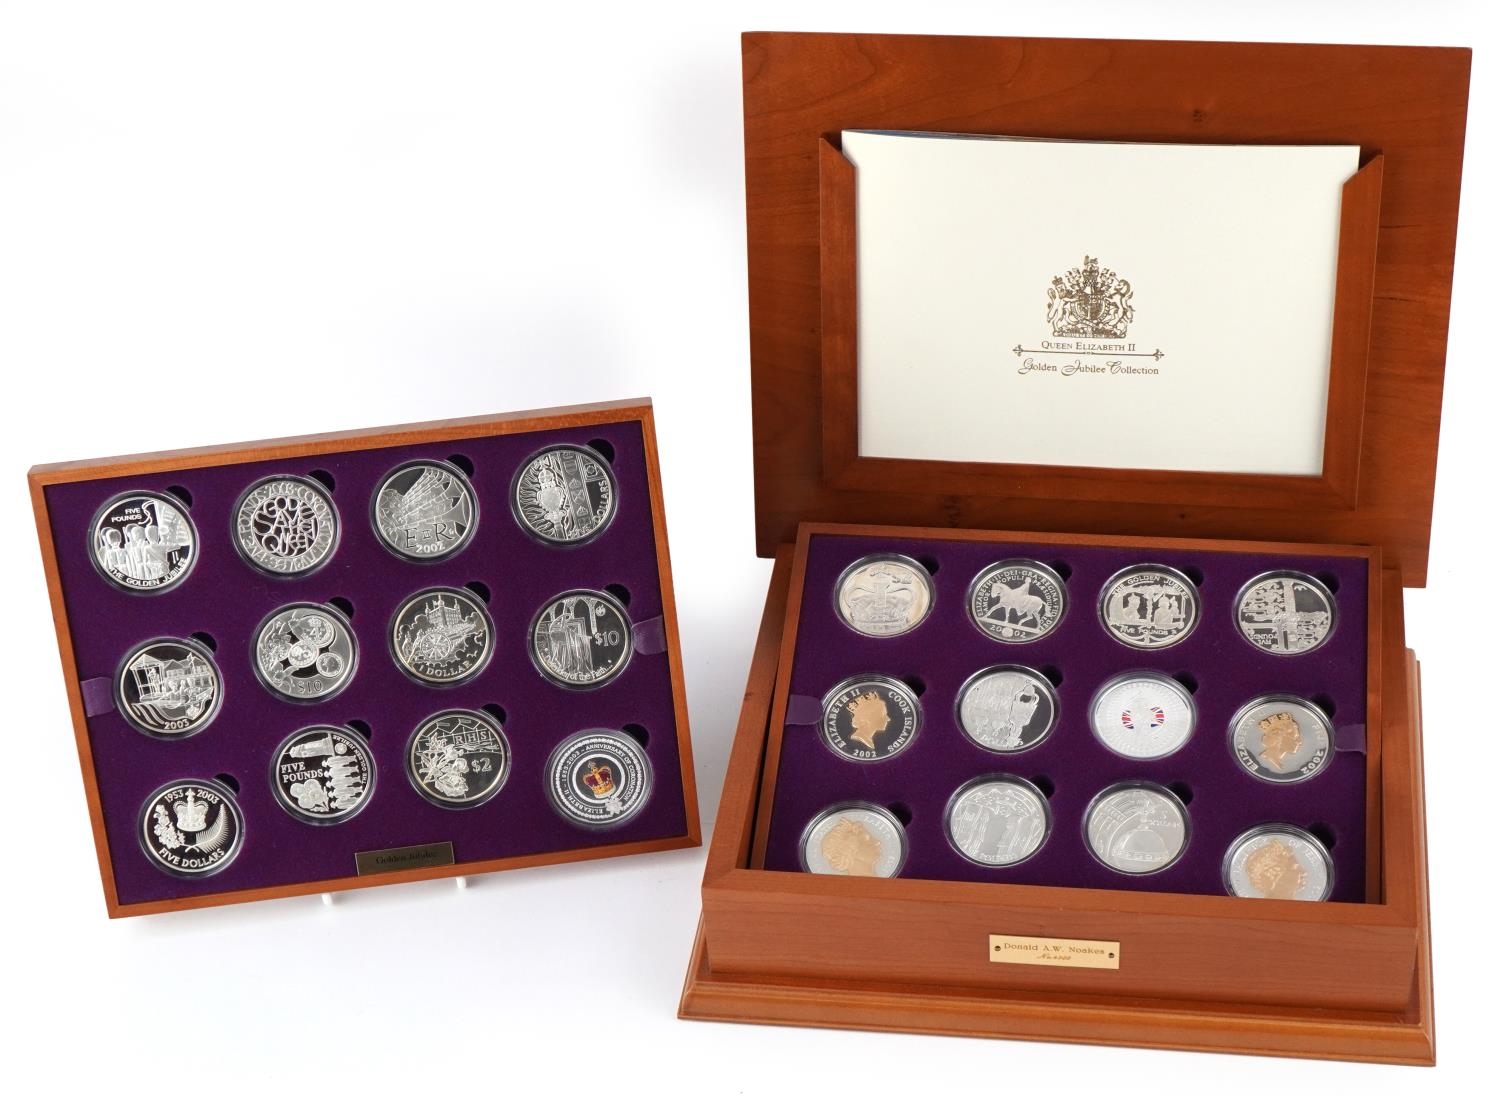 Queen Elizabeth II Golden Jubilee silver proof coin collection comprising twenty four coins housed